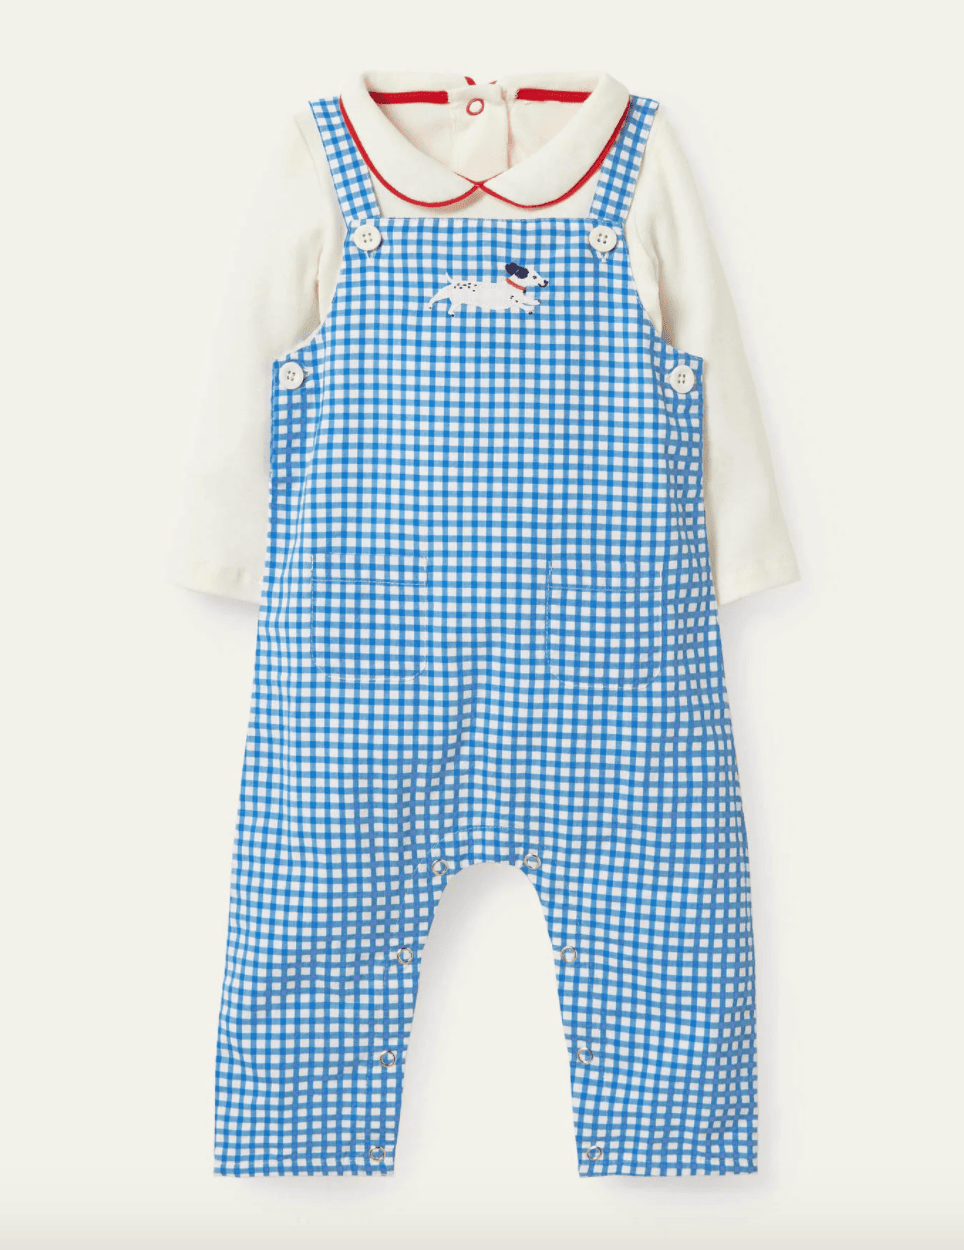 gingham overall outfit with an embroidered dog